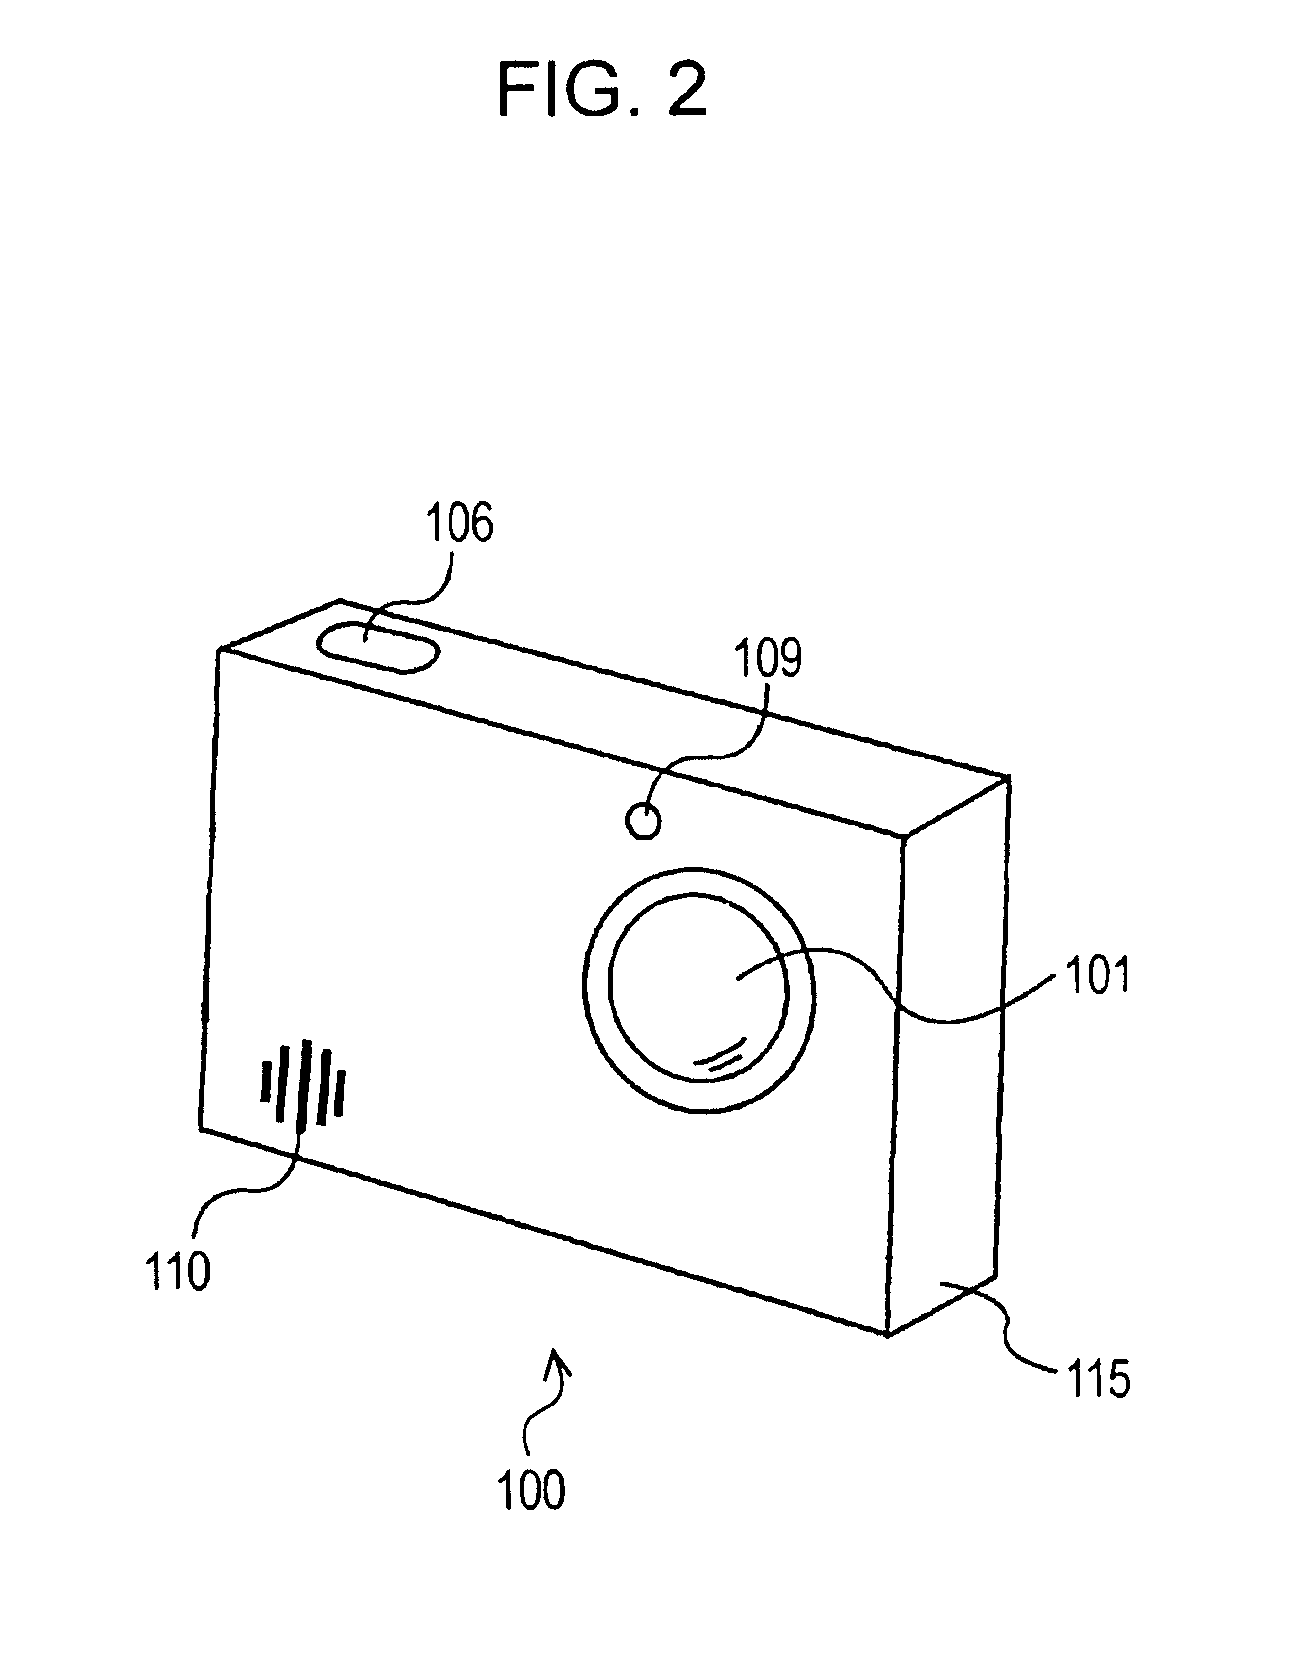 Imaging apparatus, imaging method and computer program for detecting a facial expression from a normalized face image